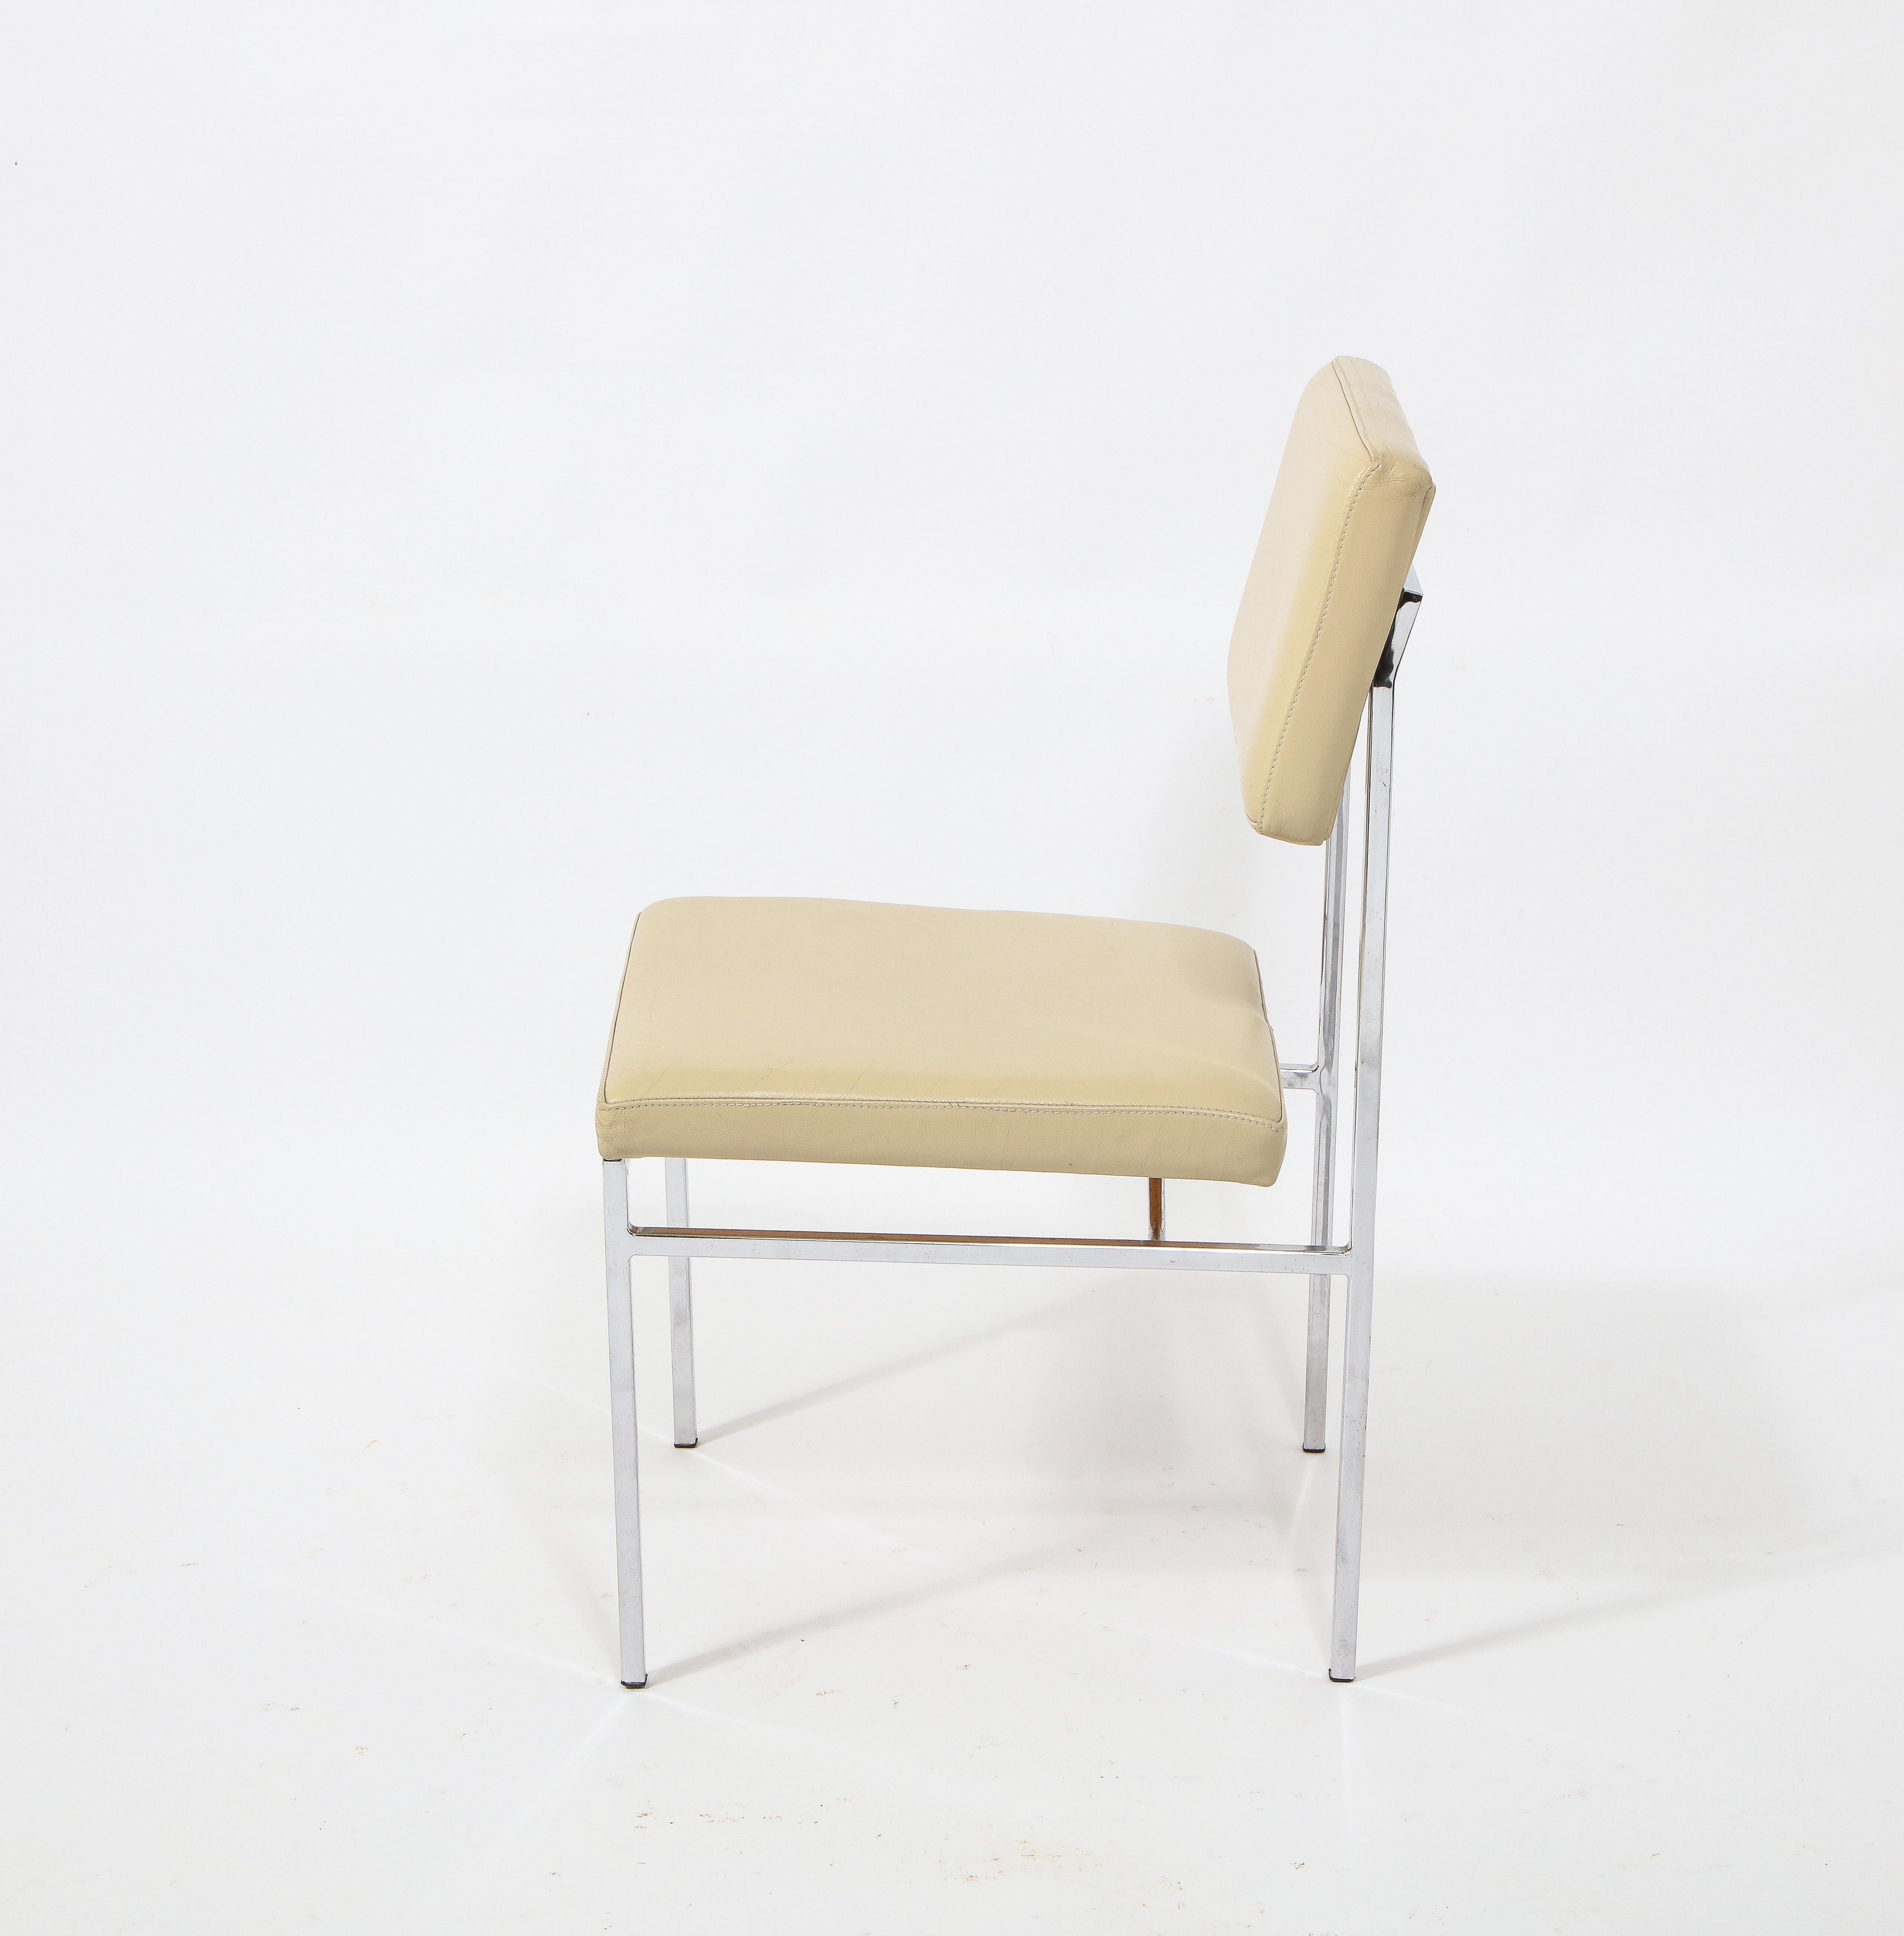 6 Chrome and Cream Leather P60 Chairs by Philippon & Lecoq, France, 1960's For Sale 4